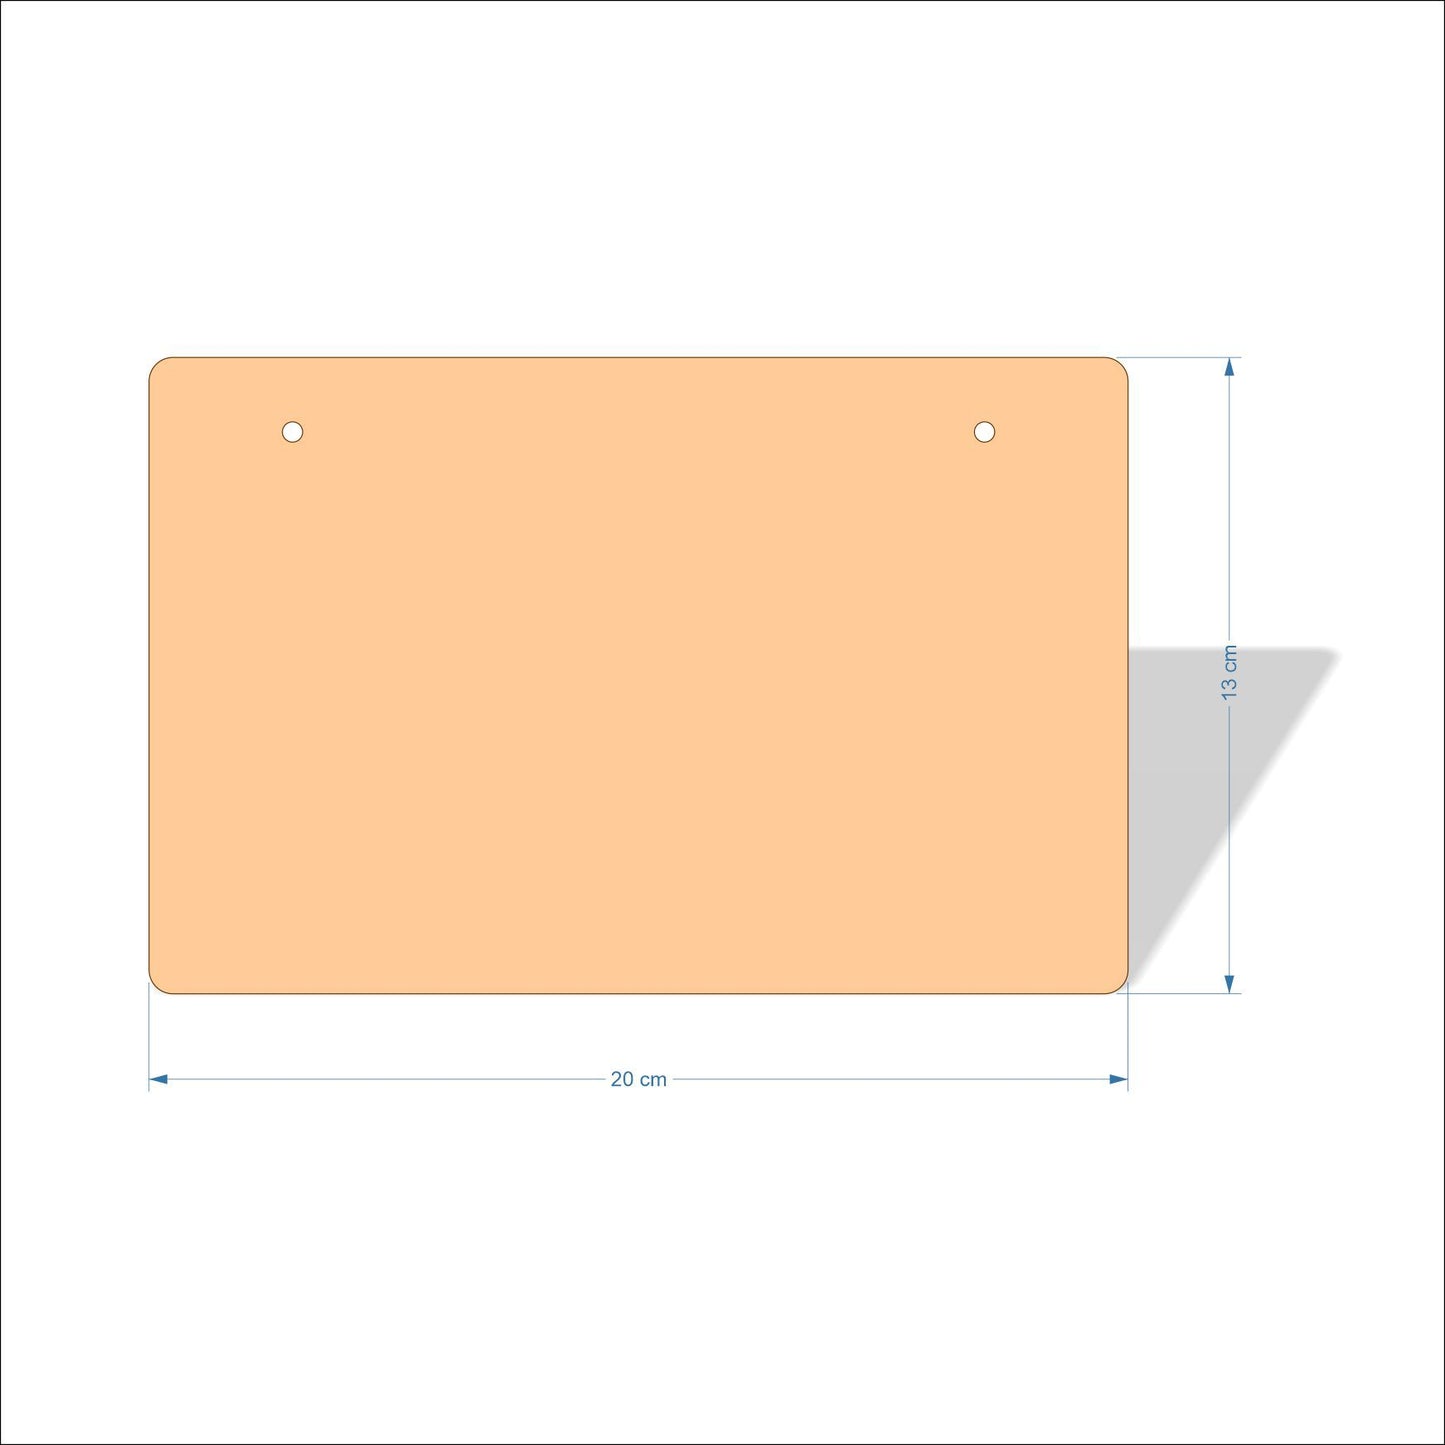 20 cm X 13 cm 3mm MDF Plaques with rounded corners